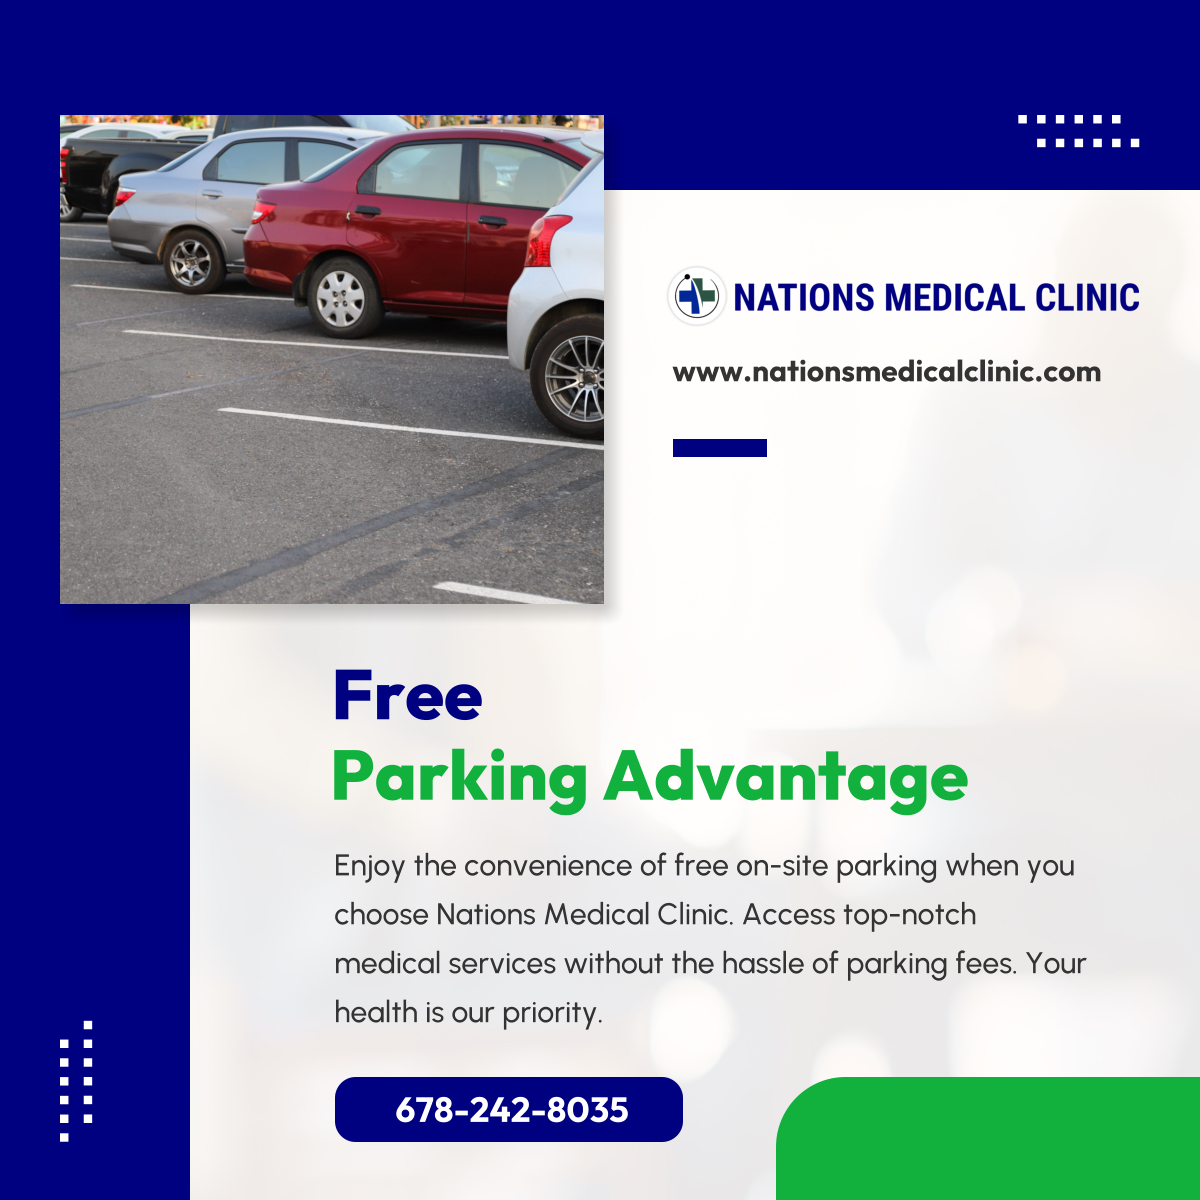 Experience the free parking advantage! Choose Nations Medical Clinic for top-notch medical services and enjoy the convenience of free on-site parking. Your health is our priority. 

#DuluthGA #UrgentCare #FreeParking